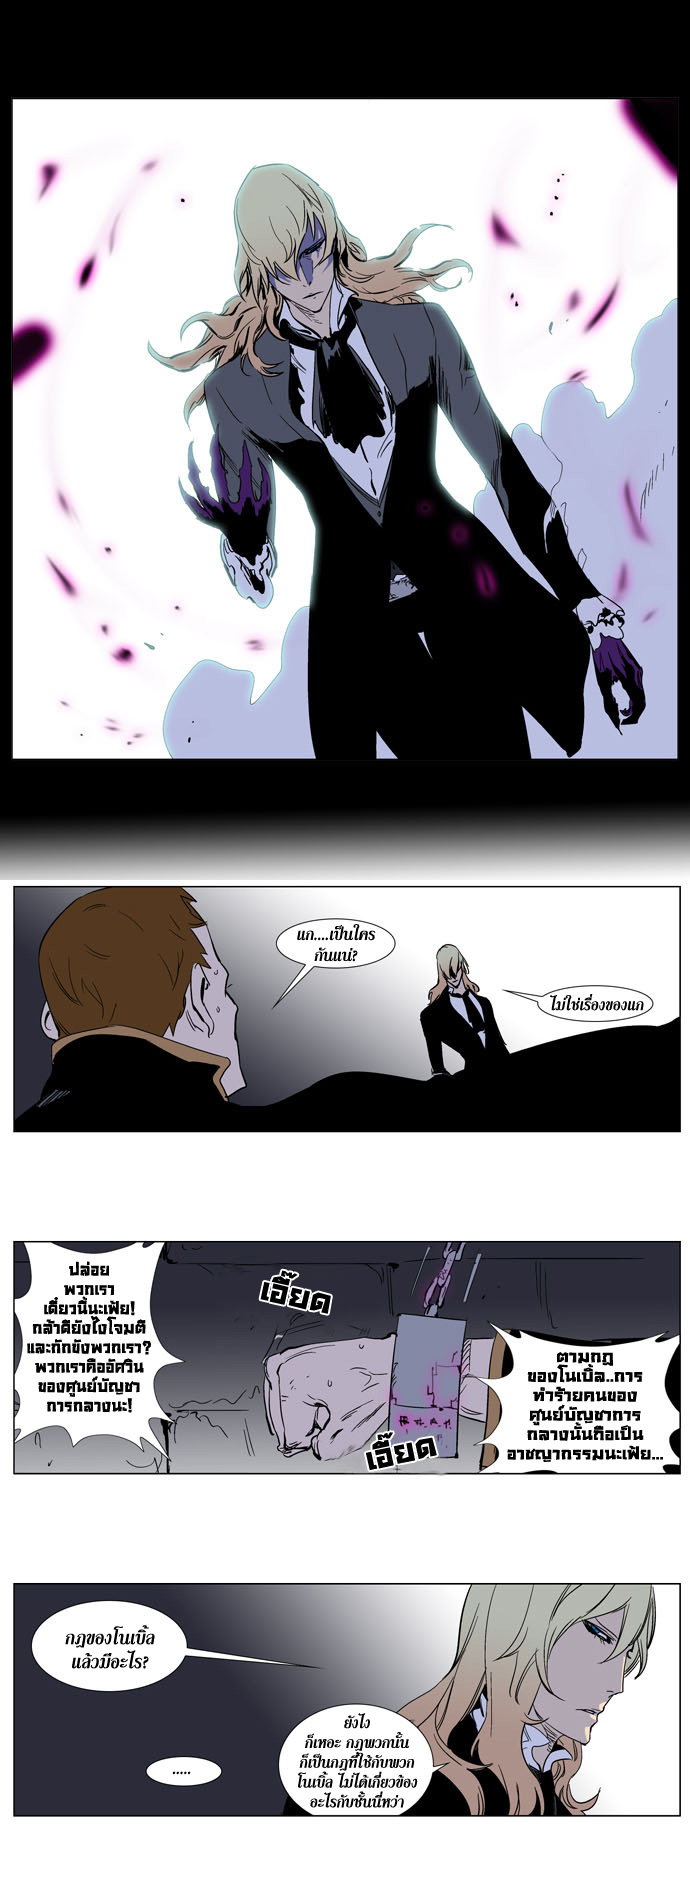 Noblesse 239 019